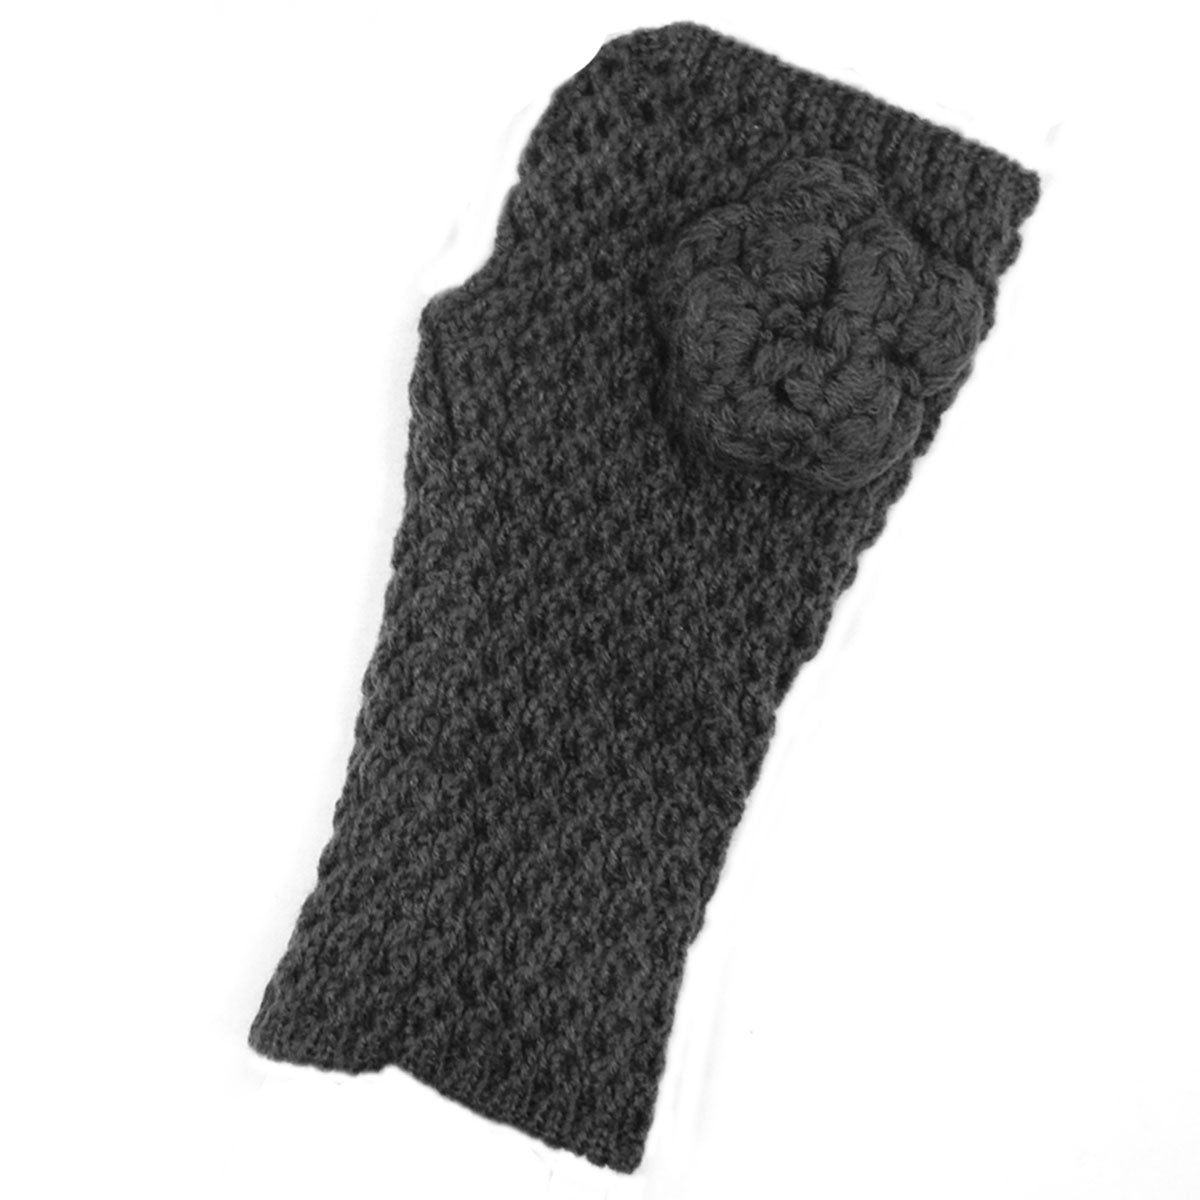 Wrapables Soft Knit Fingerless Gloves with Flower